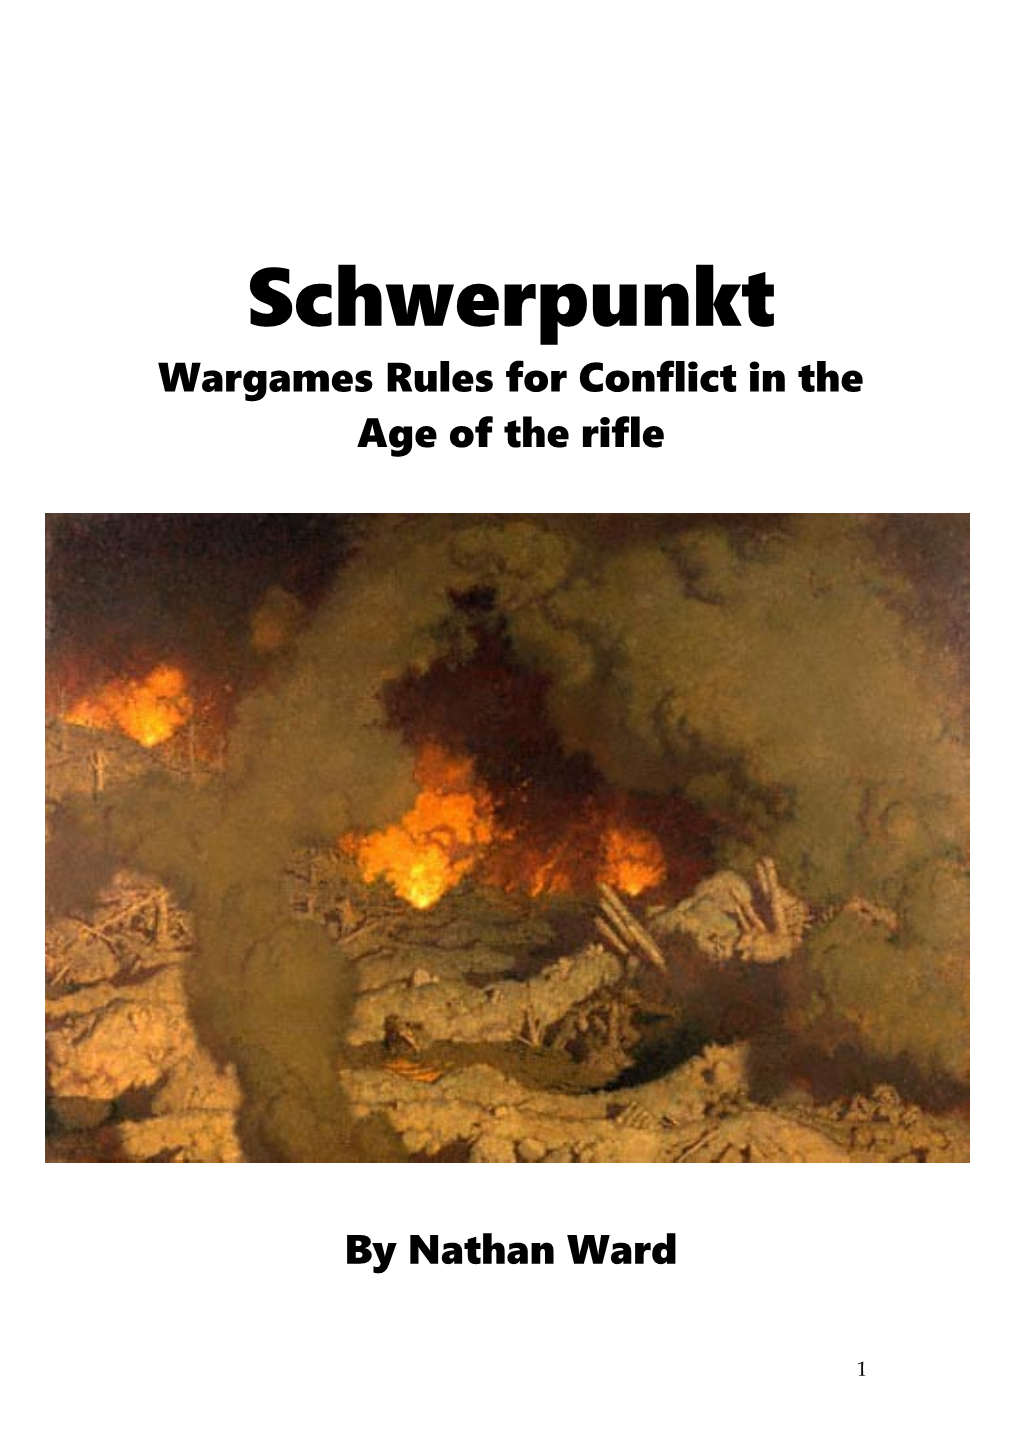 Wargames Rules for Conflict in the Age of the Rifle